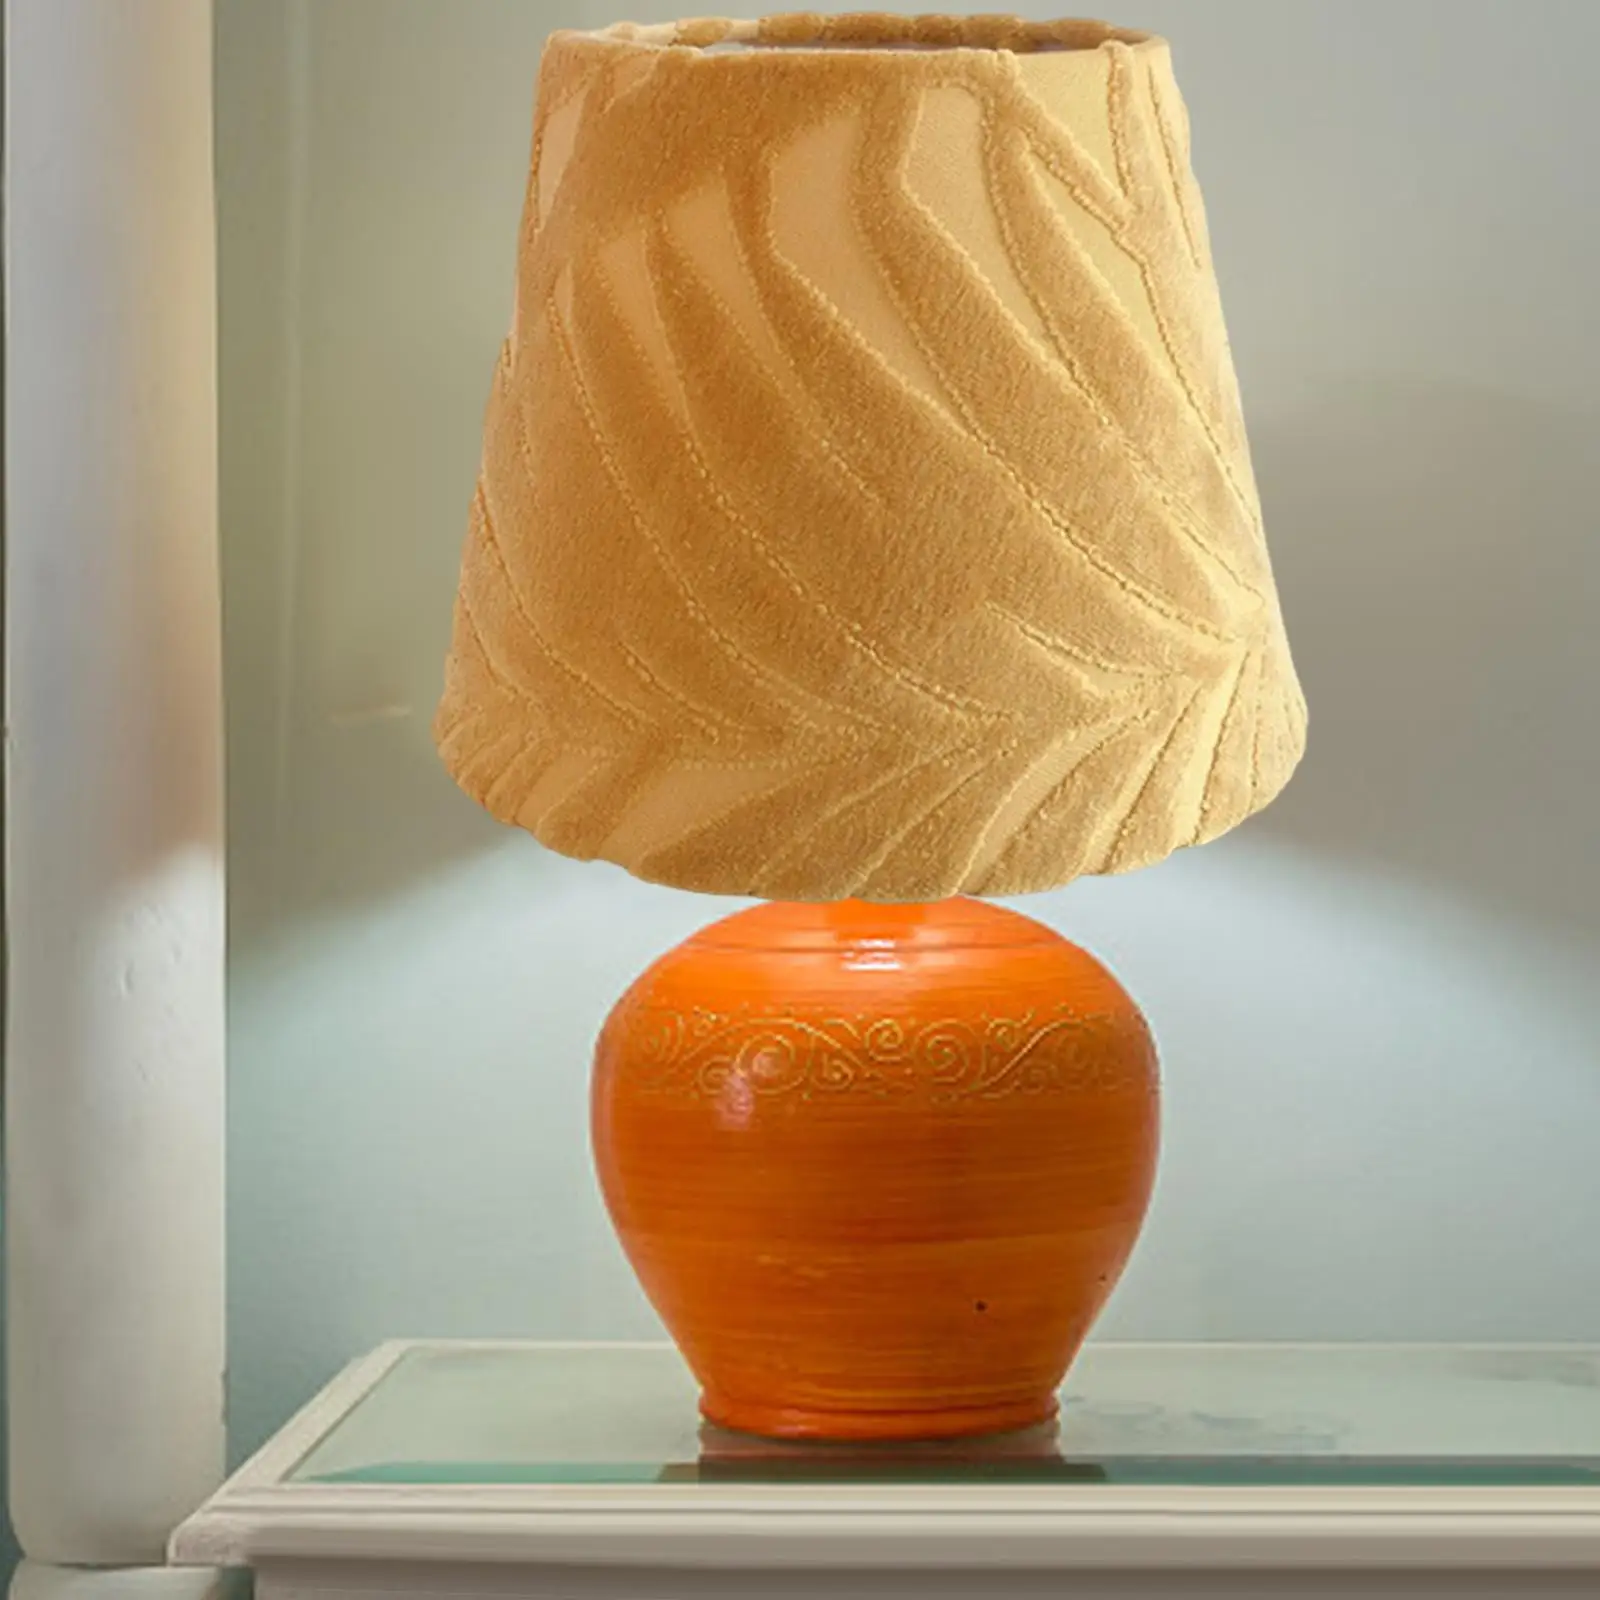 Lampshade Bulb Cover made of , simple with durable handmade materials, DIY retro